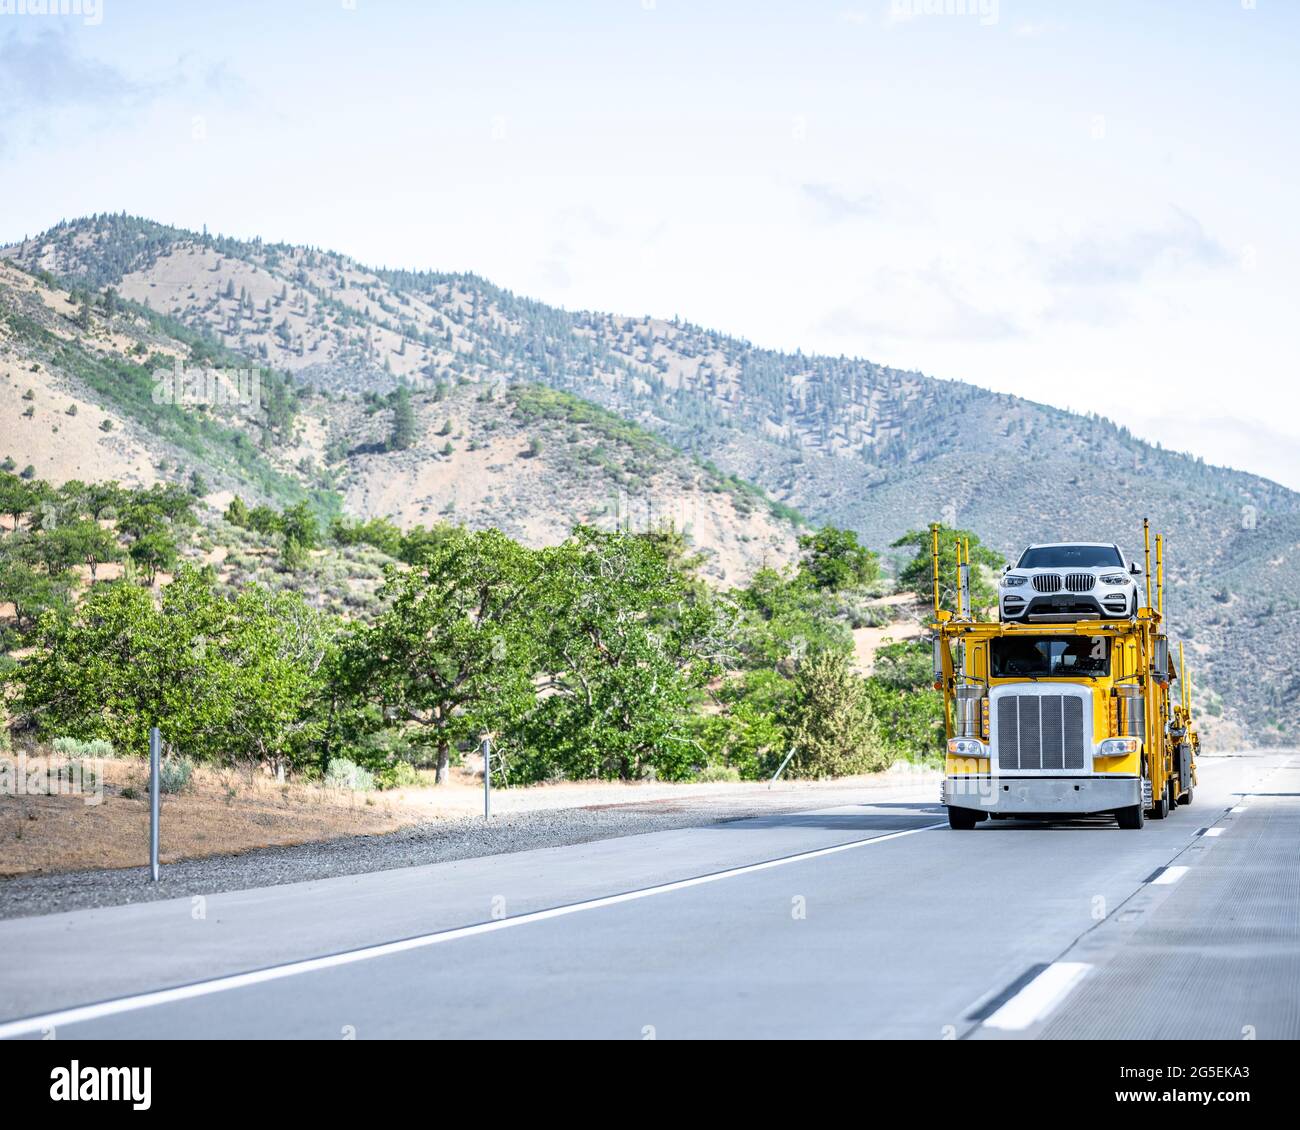 Yellow professional industrial big rig car hauler semi truck transporting cars on the modular semi trailer running on the road with bald mountains of Stock Photo